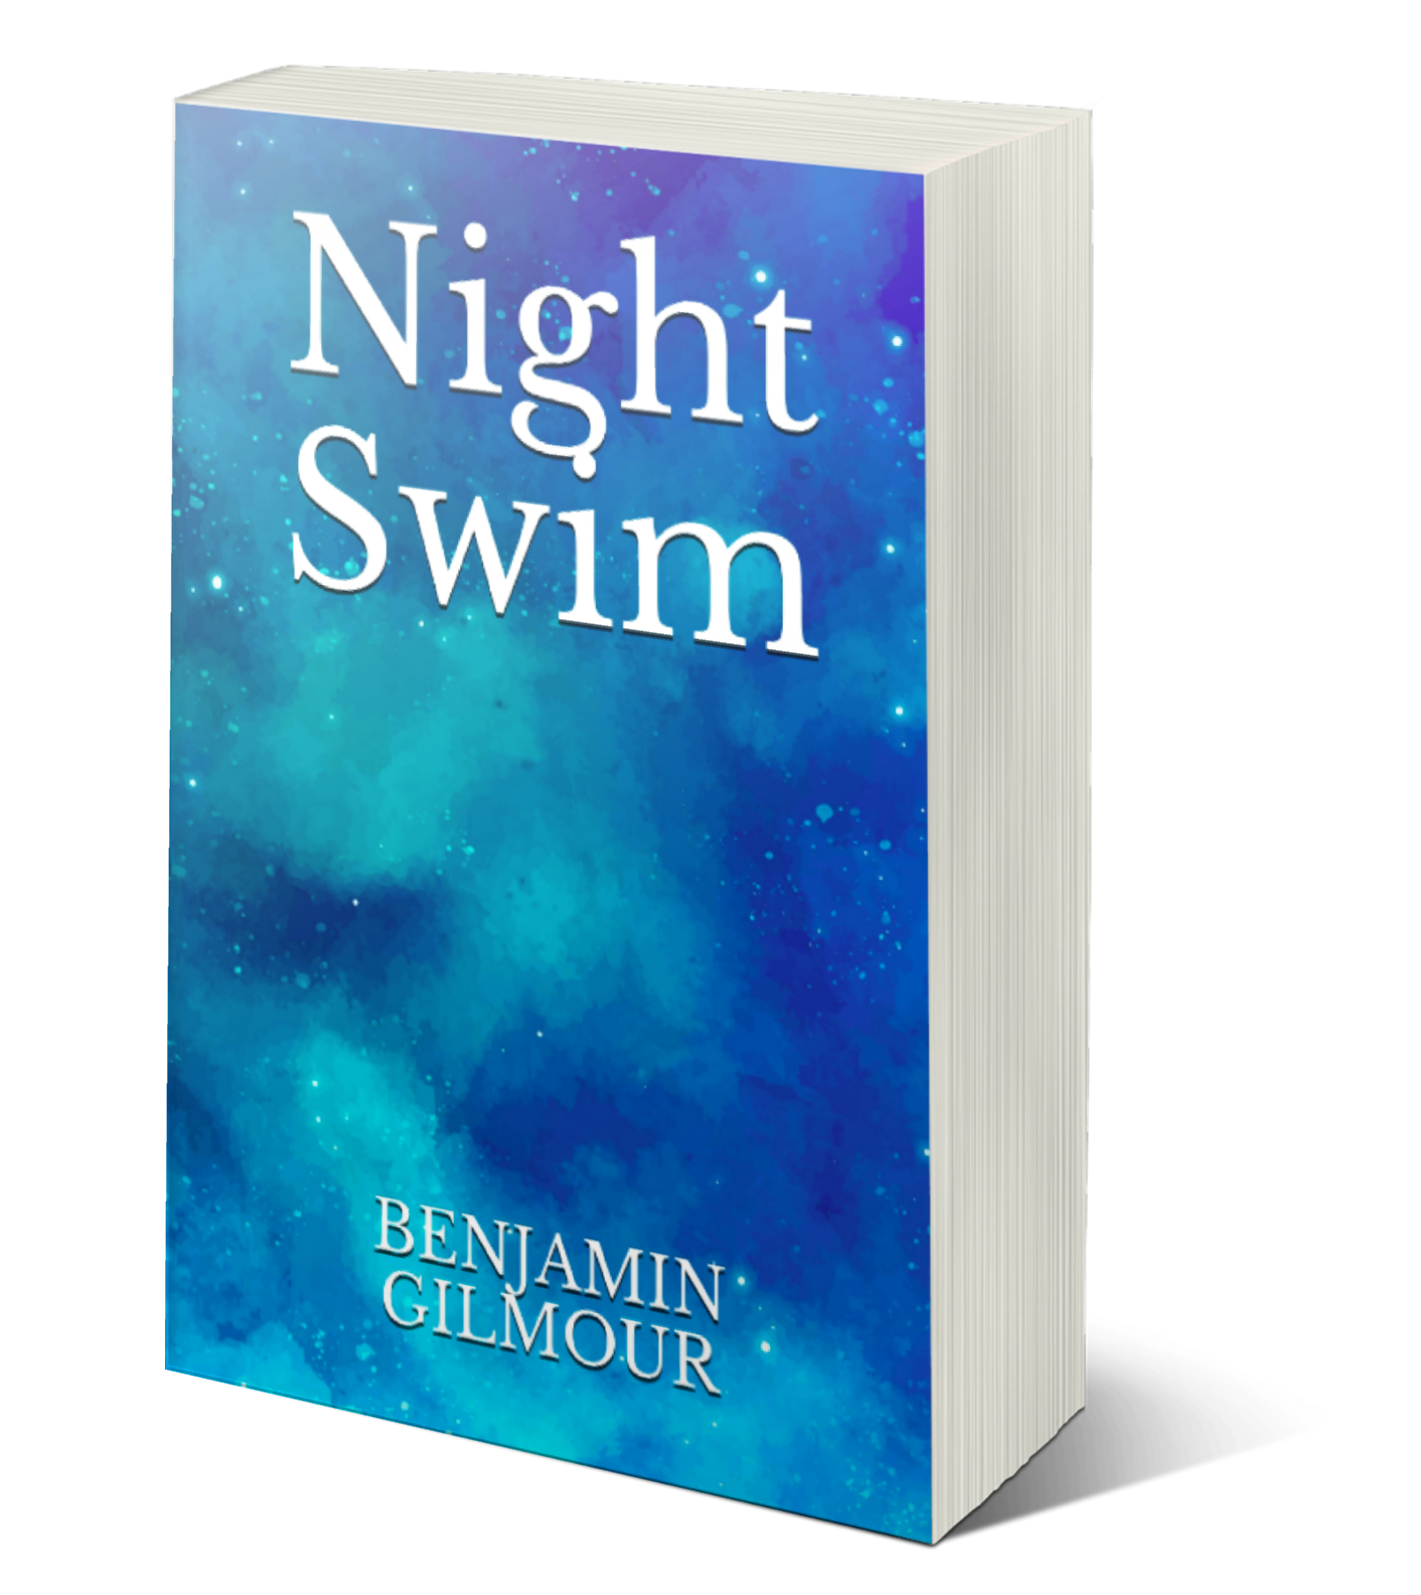 ‘Night Swim’ – First poetry book in 22 years